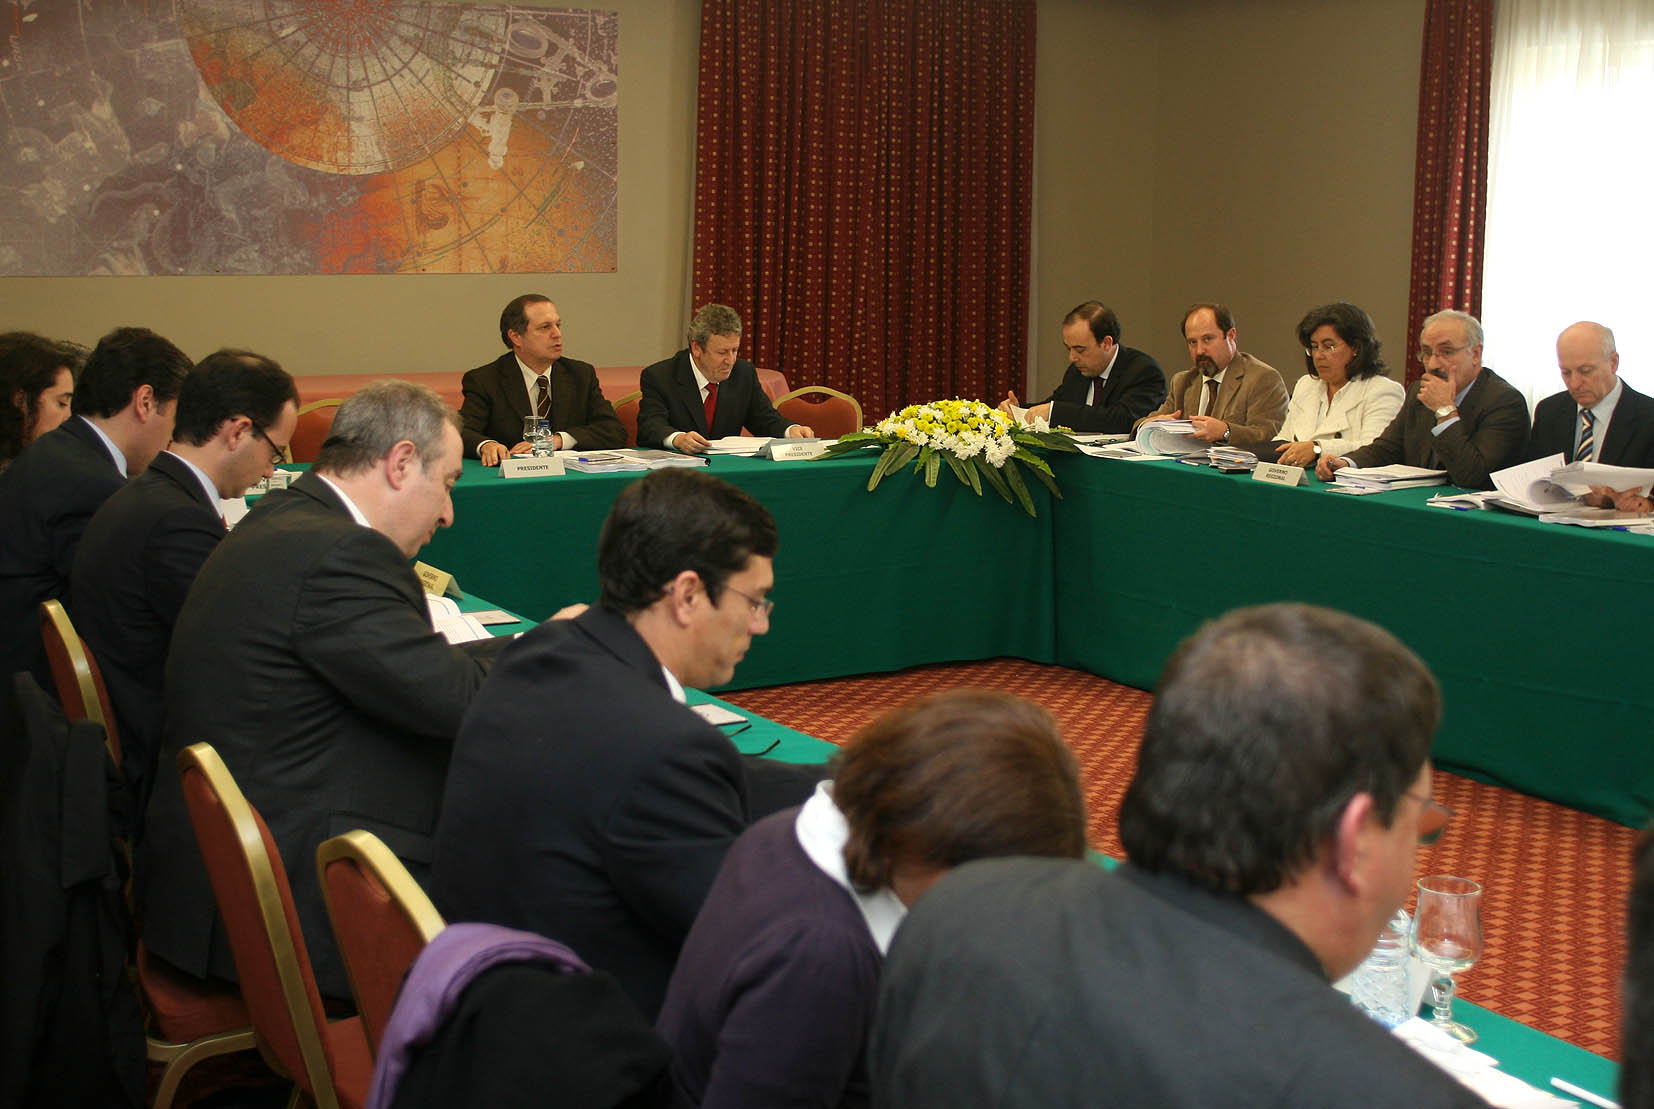 President Carlos César is happy with the consensus reached at the discussion of the Regional Strategic Council’s Plan for 2009